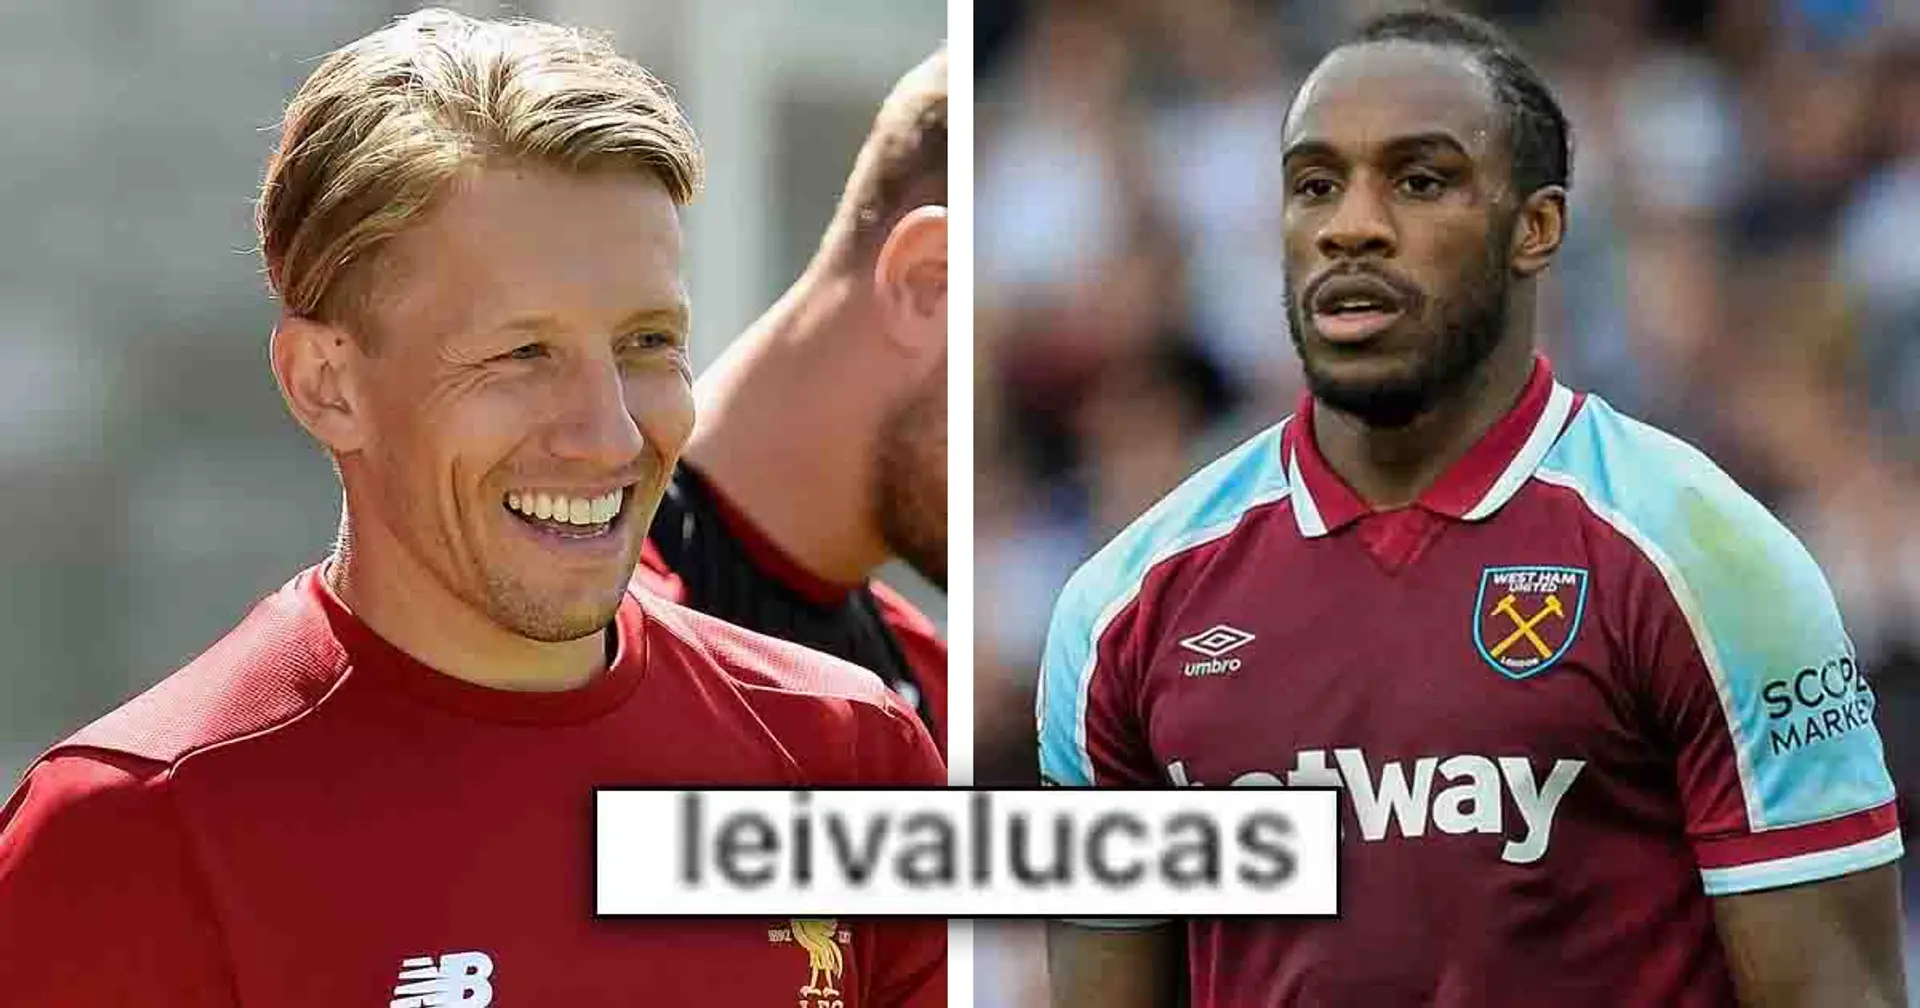 Spotted: Lucas Leiva's savage jibe at Michail Antonio after his Anfield stinker